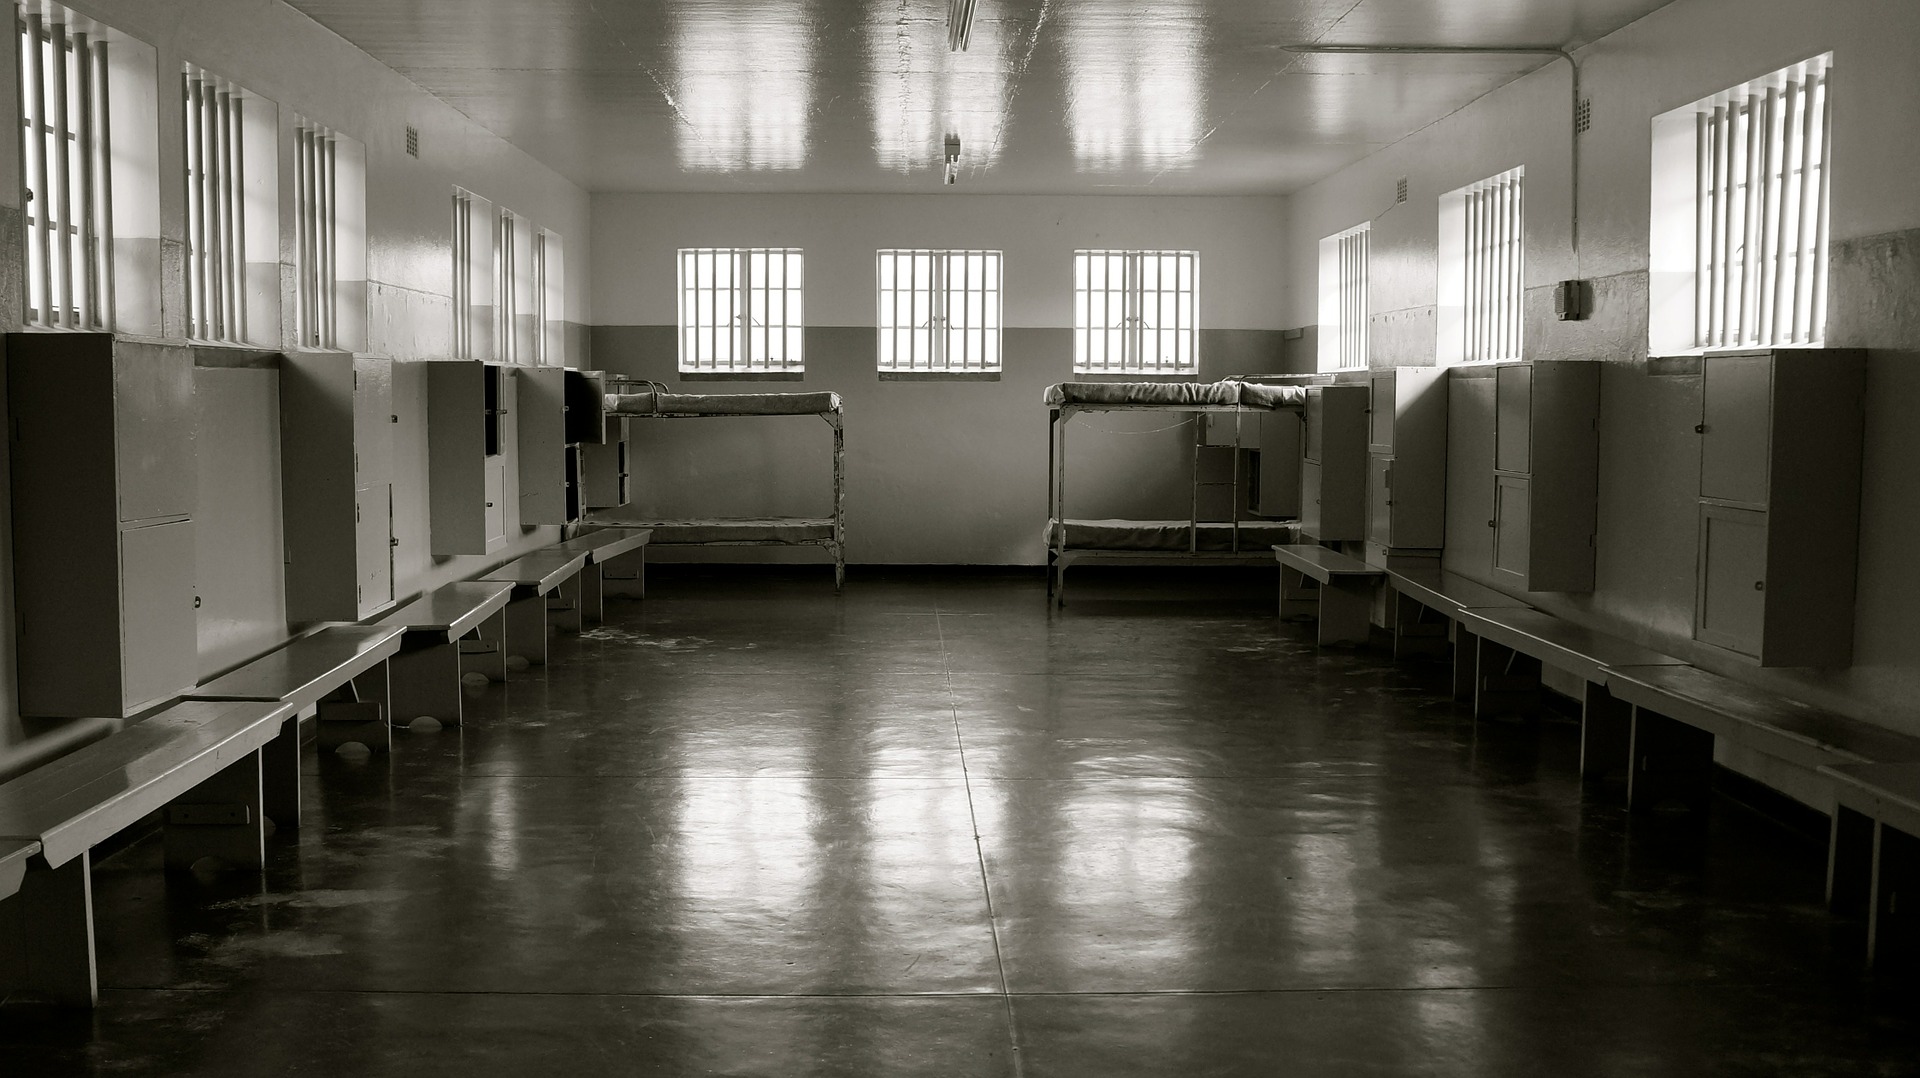 A room inside a prison on Robben Island in South Africa where Nelson Mandela was once a prisoner